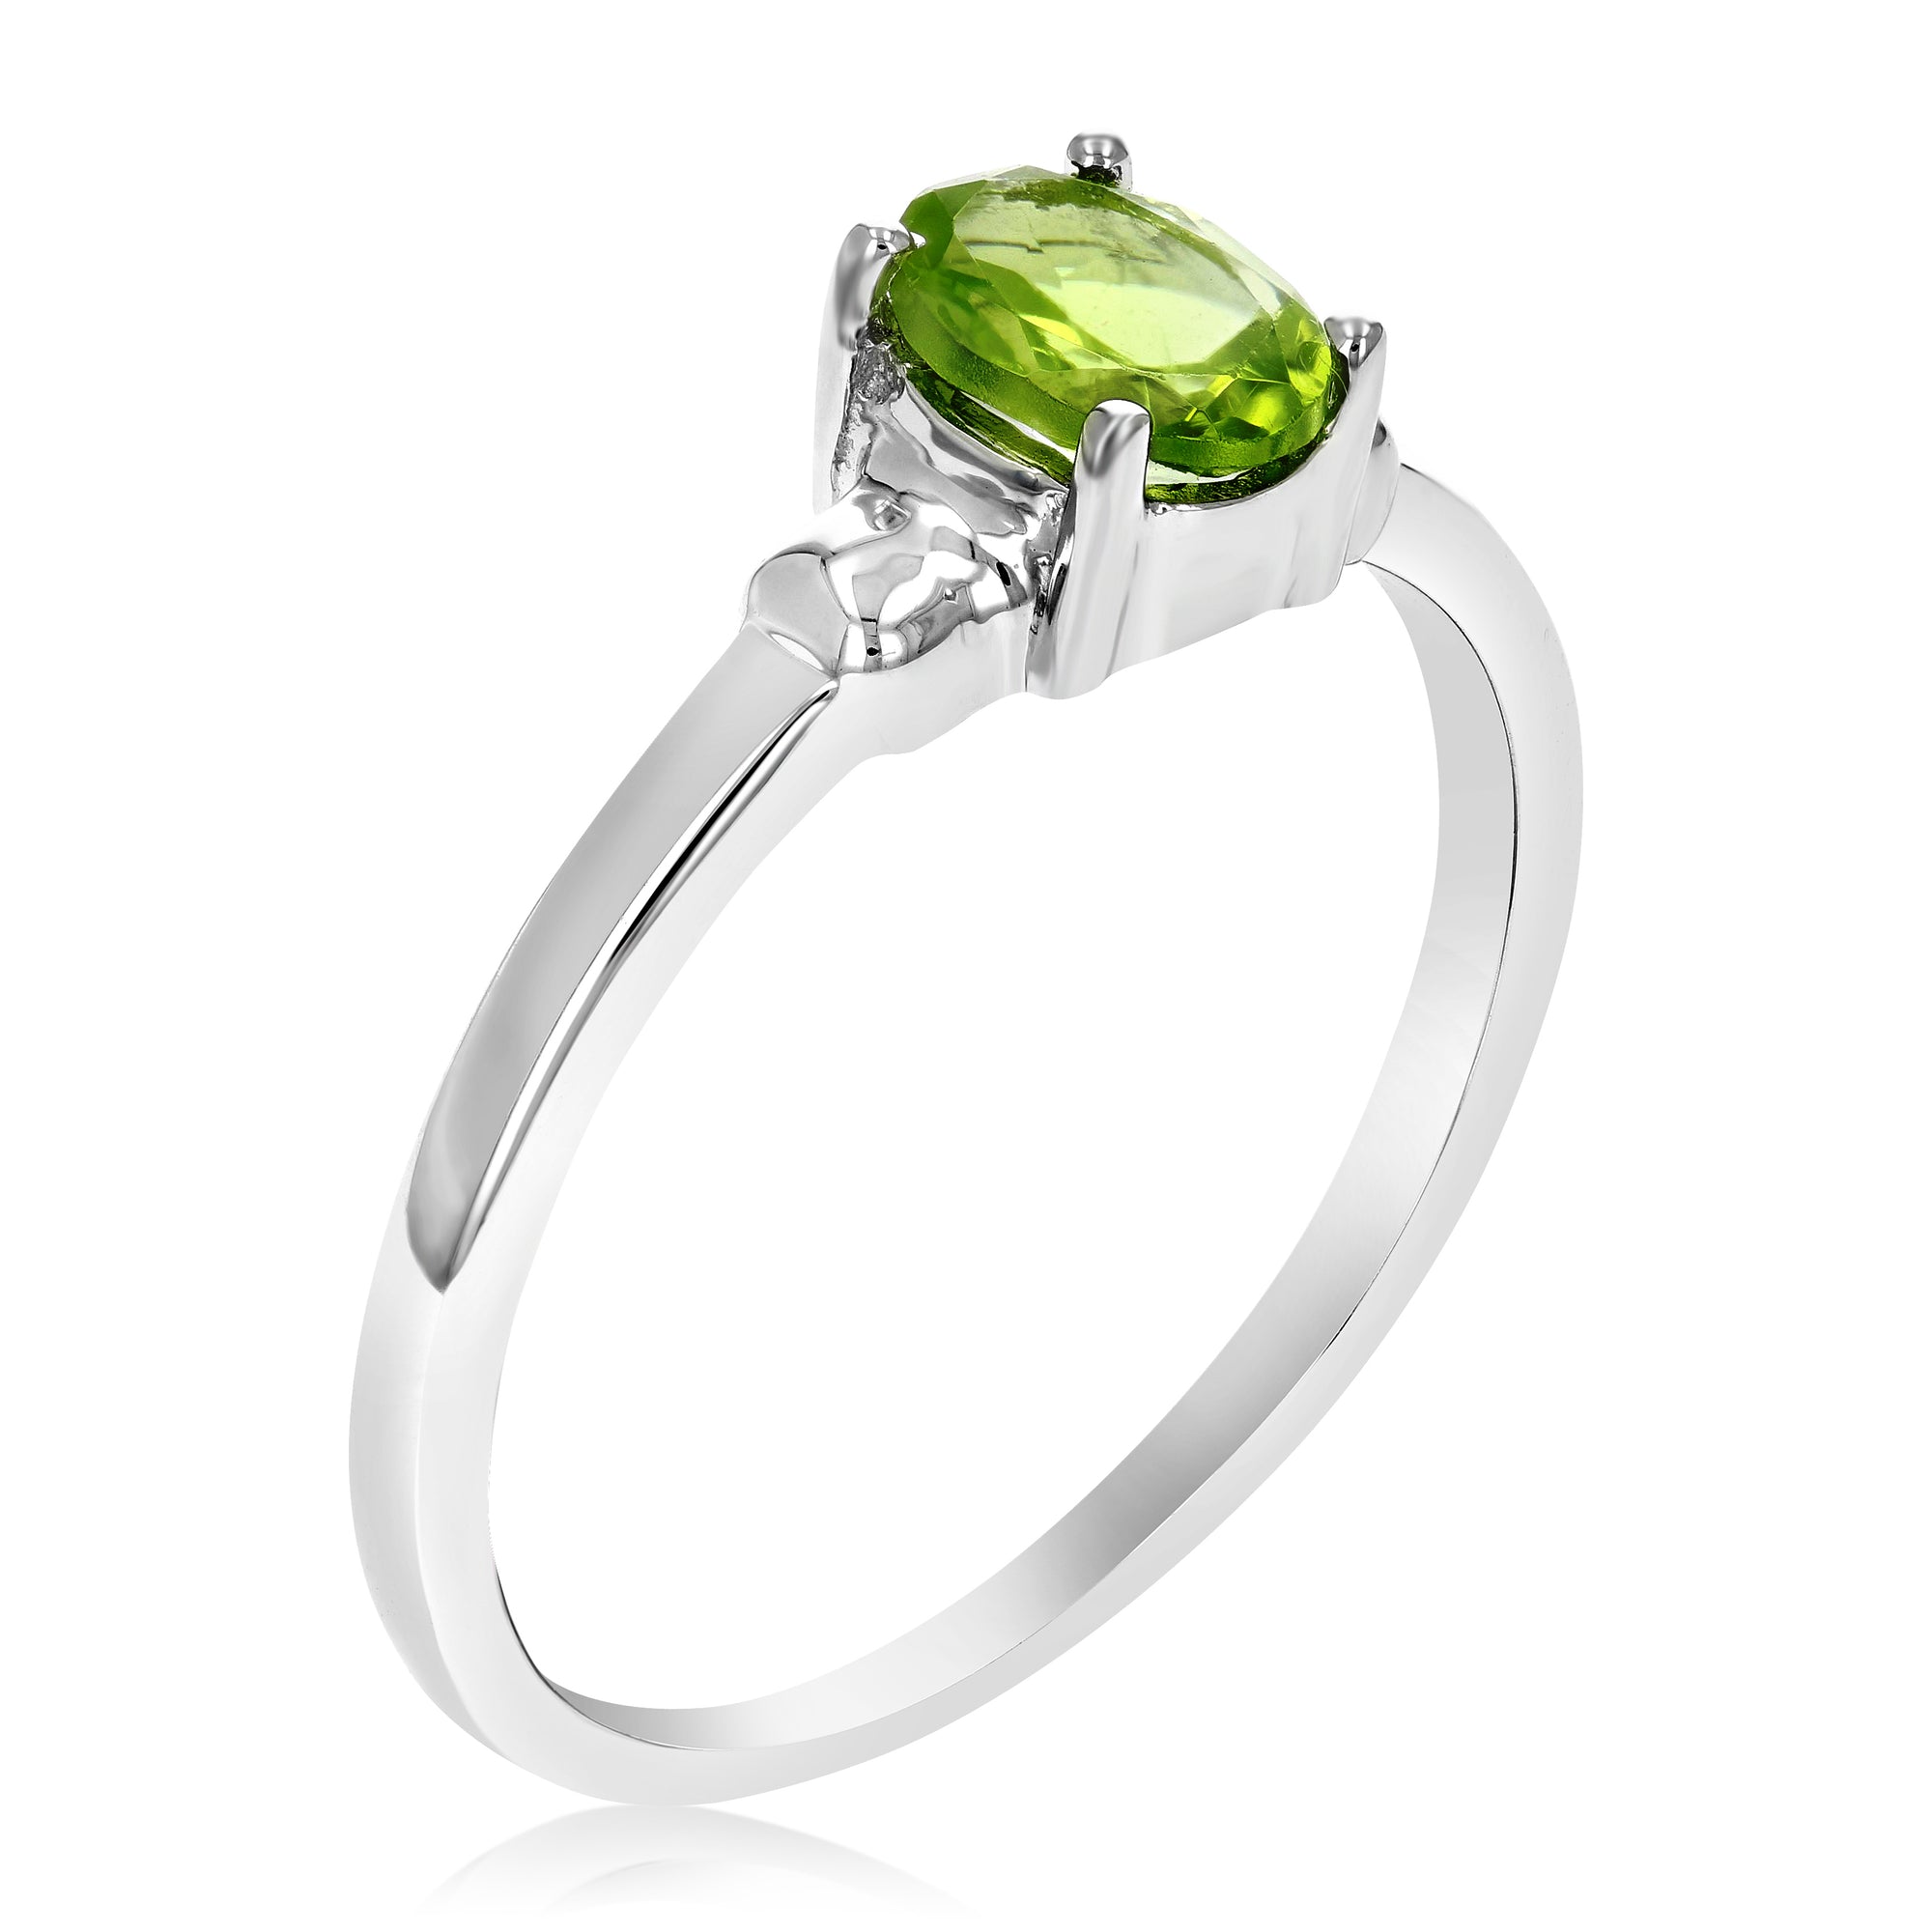 0.70 cttw Peridot Ring in .925 Sterling Silver with Rhodium Plating Oval Shape